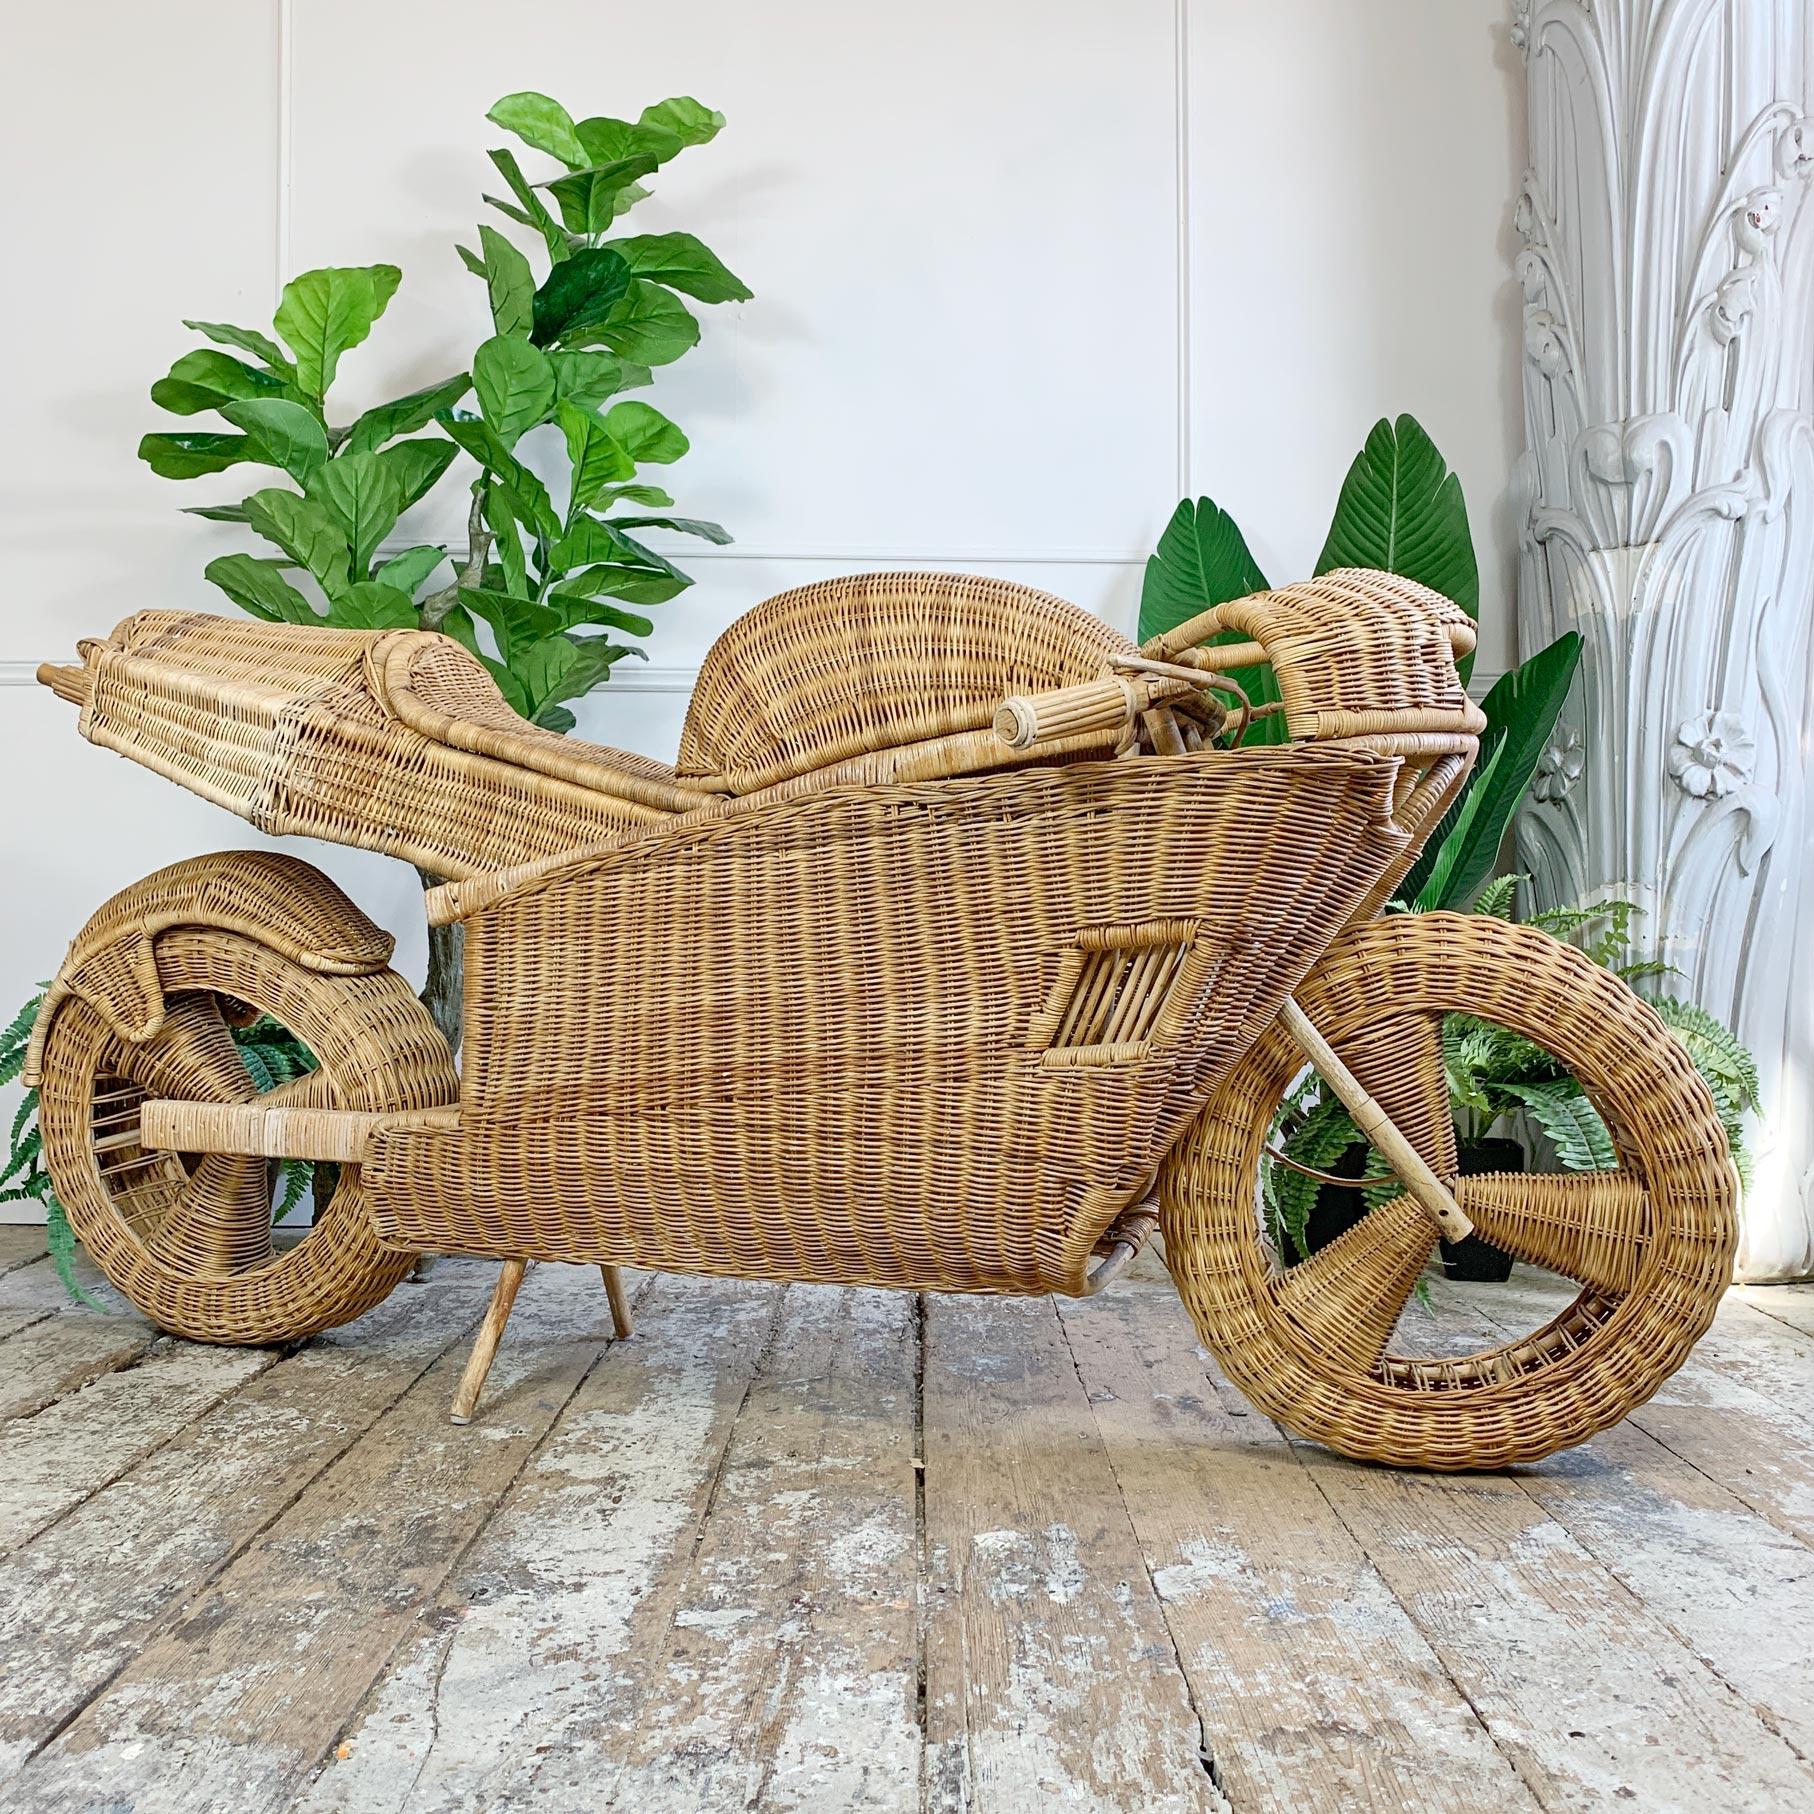 A superb sculpture in the form of a racing motorcycle, using wicker rattan and bamboo the detailing on this piece is fantastic, even down to the rear internal shock absorber. 

Dating to the 1980’s, this is a rare sculpture in very good vintage